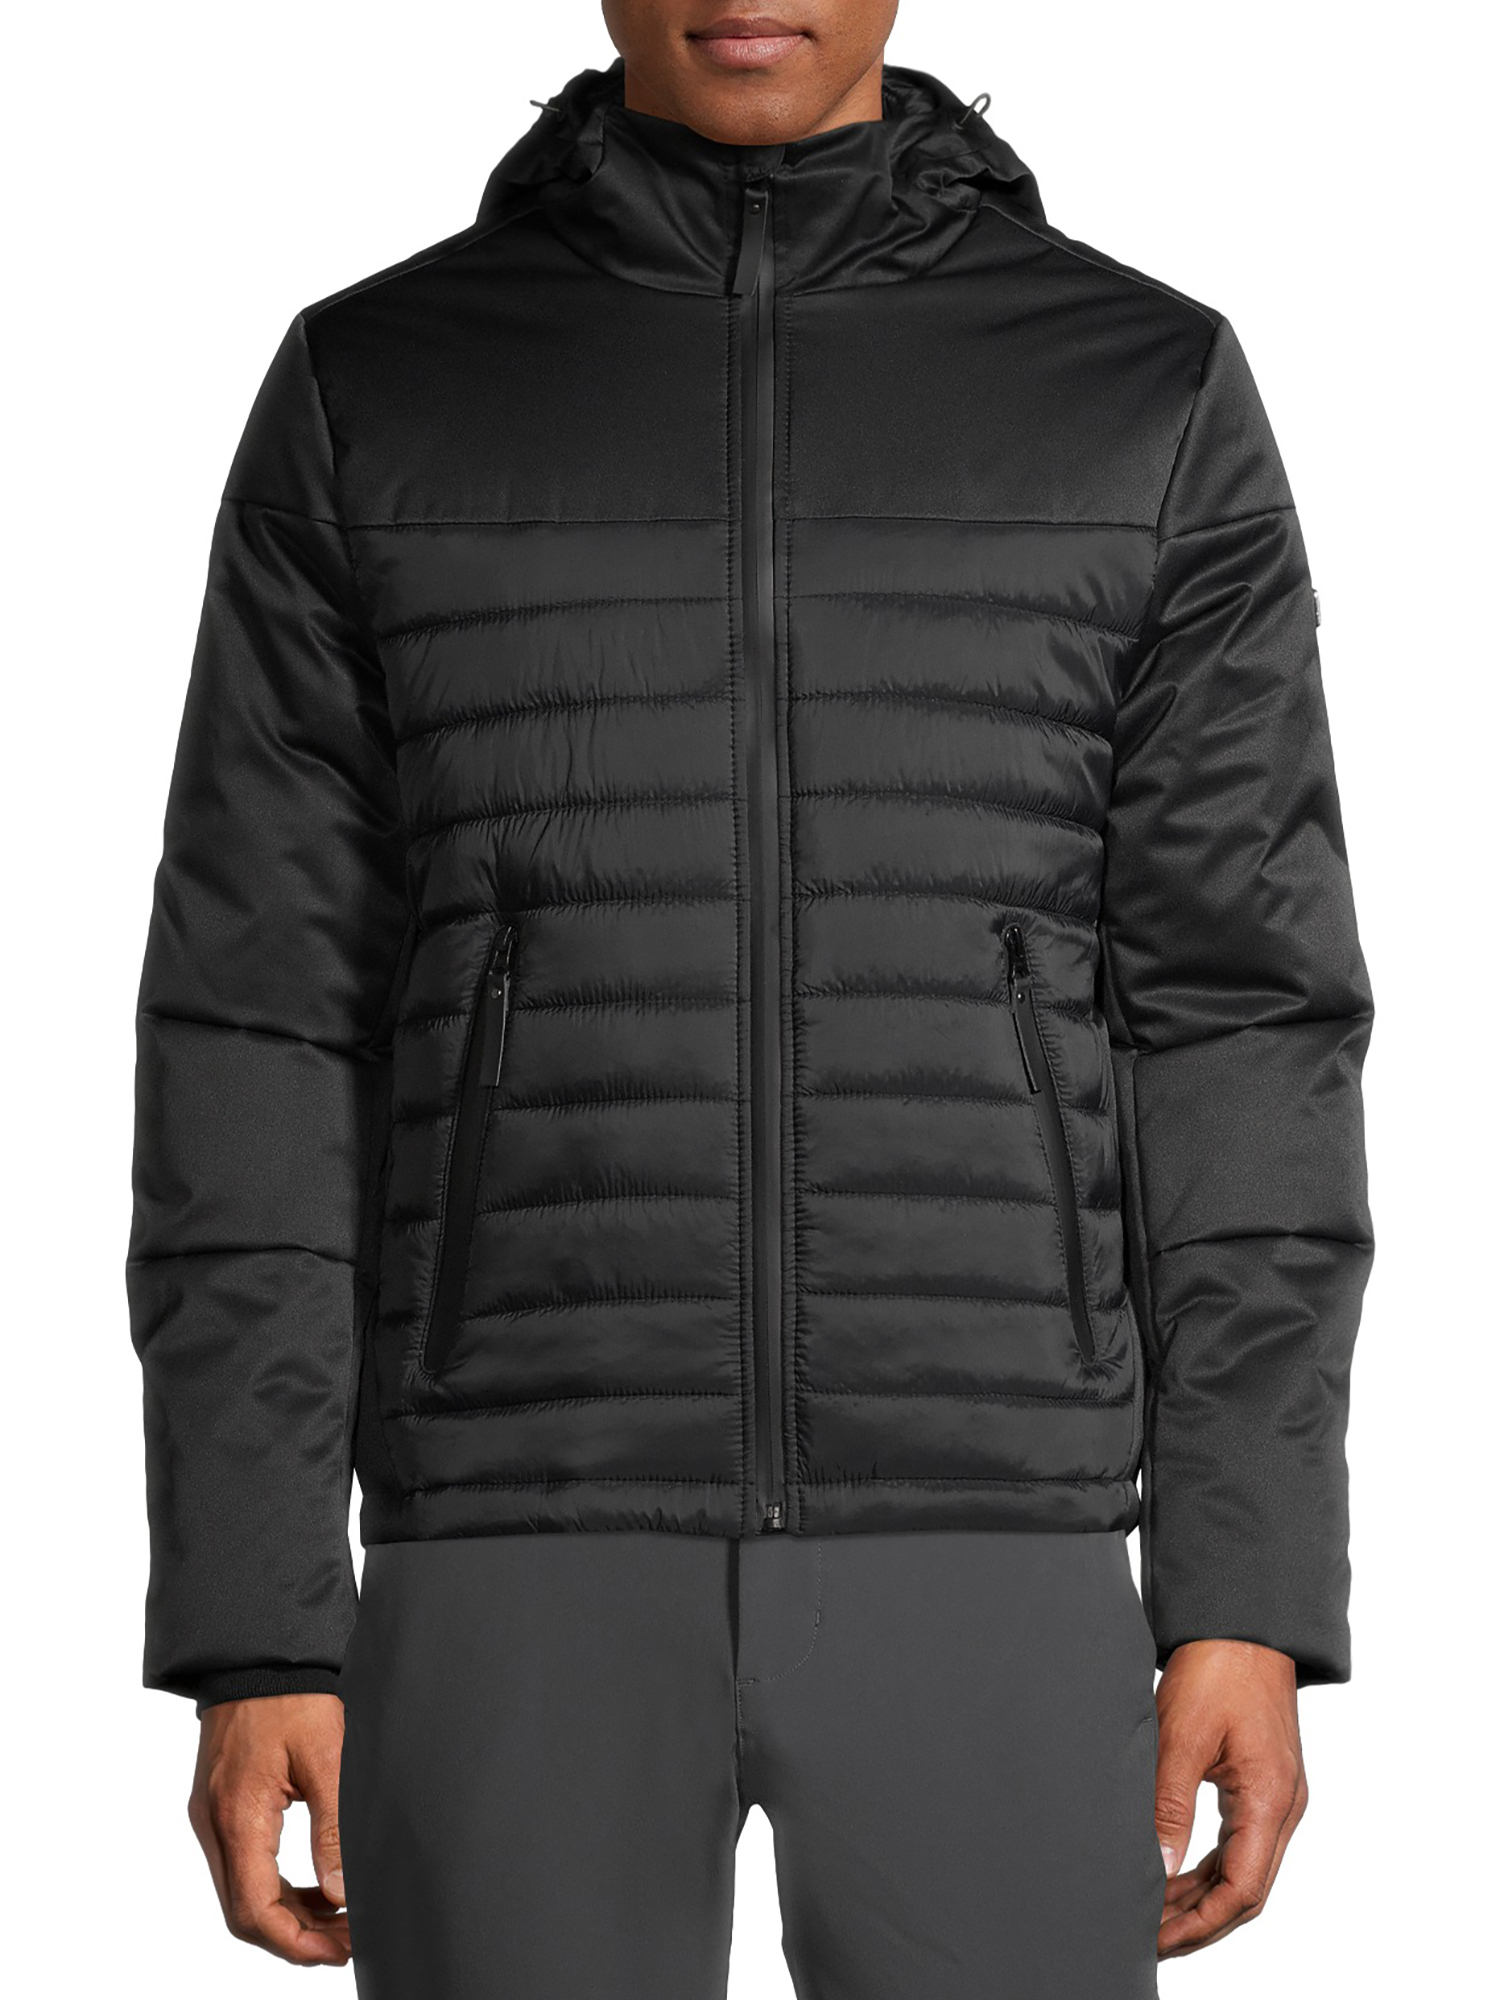 Swiss Tech Men's Hooded Softshell Quilted Mixed Media Jacket - image 1 of 7